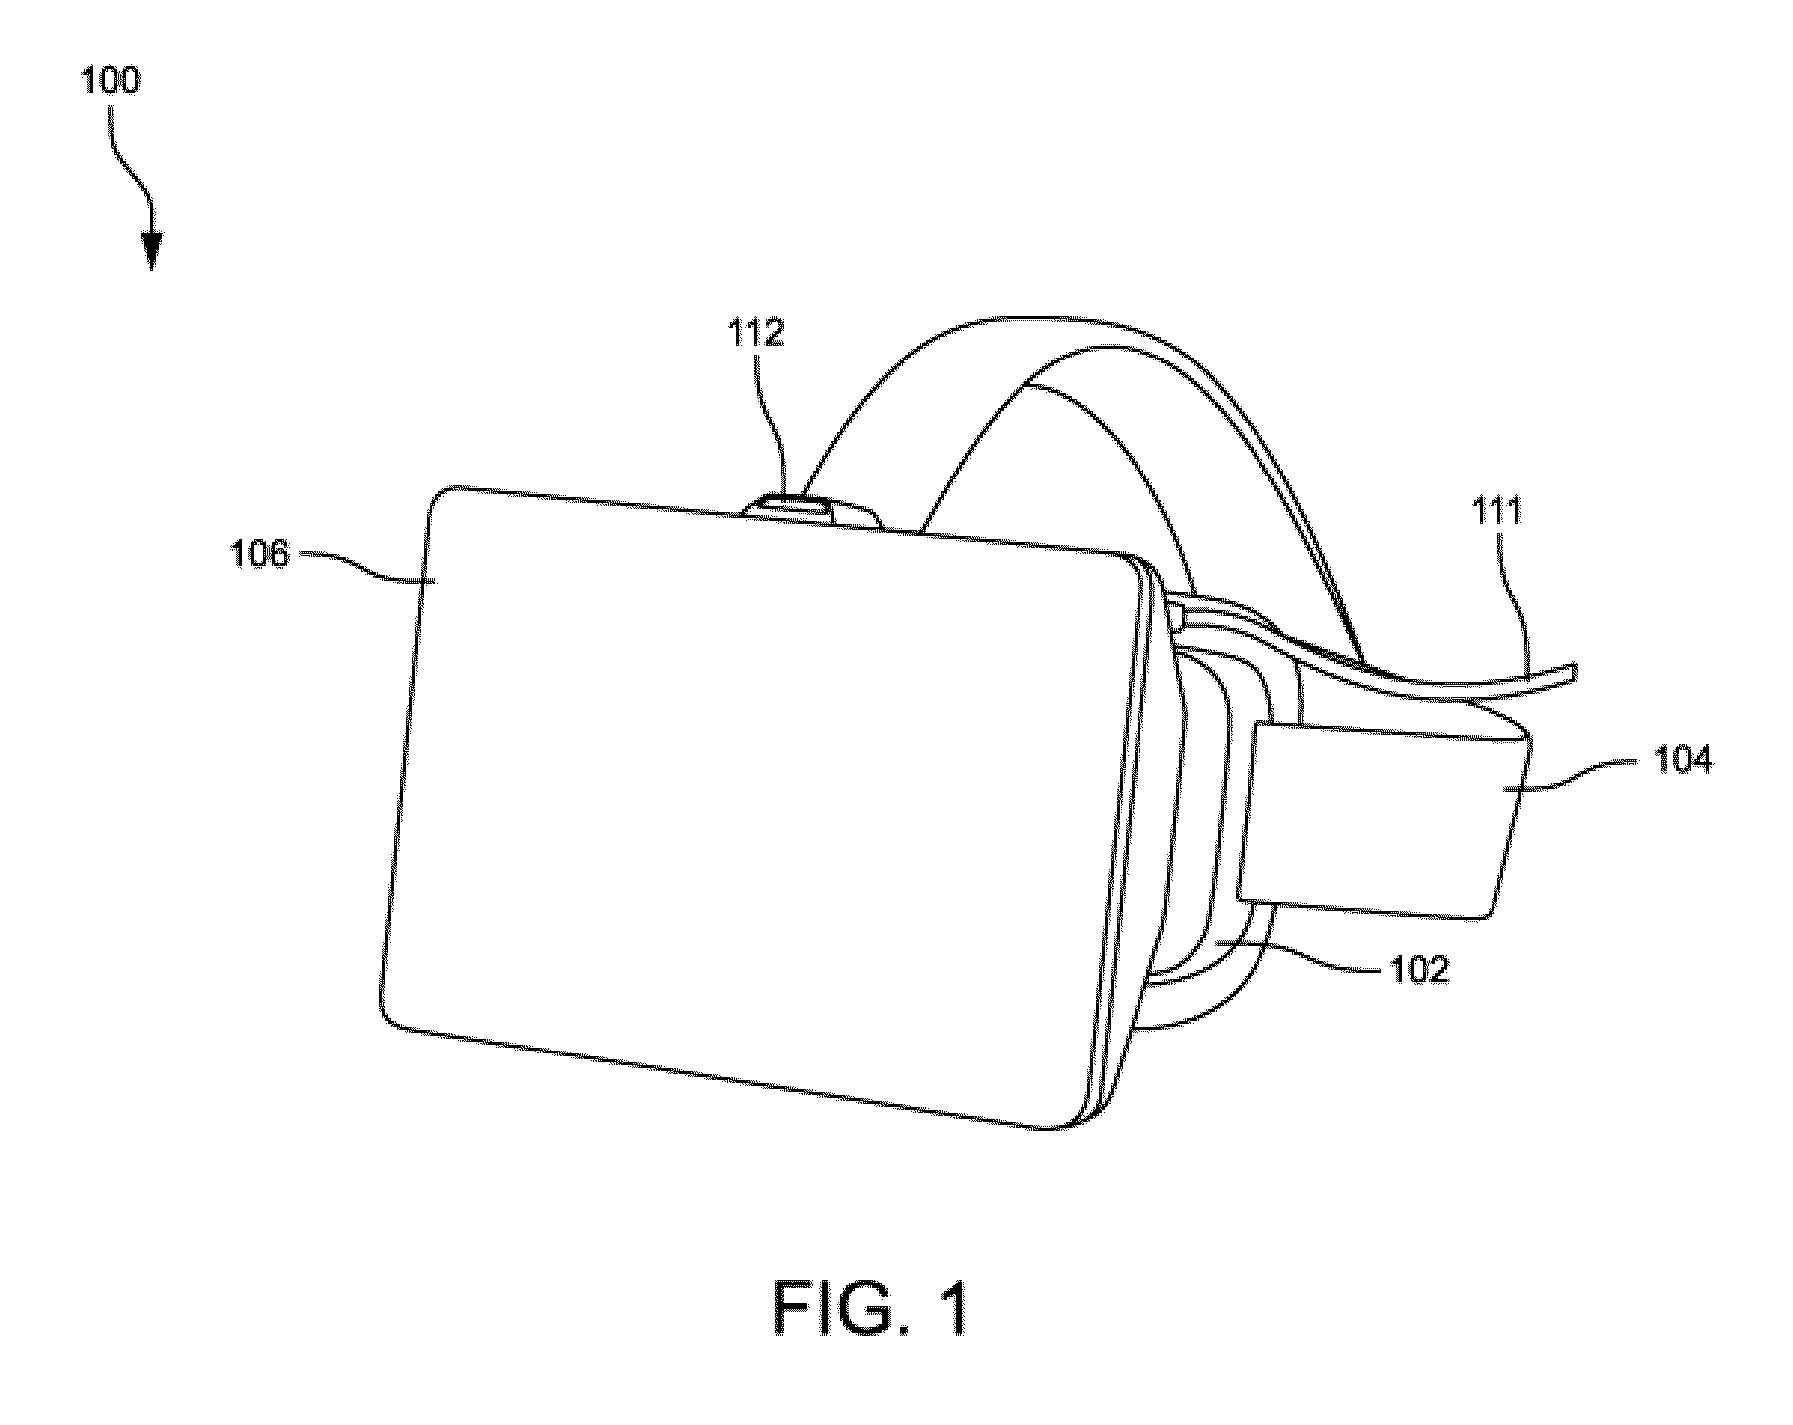 Head-mounted display device with air conditioning device and control approaches